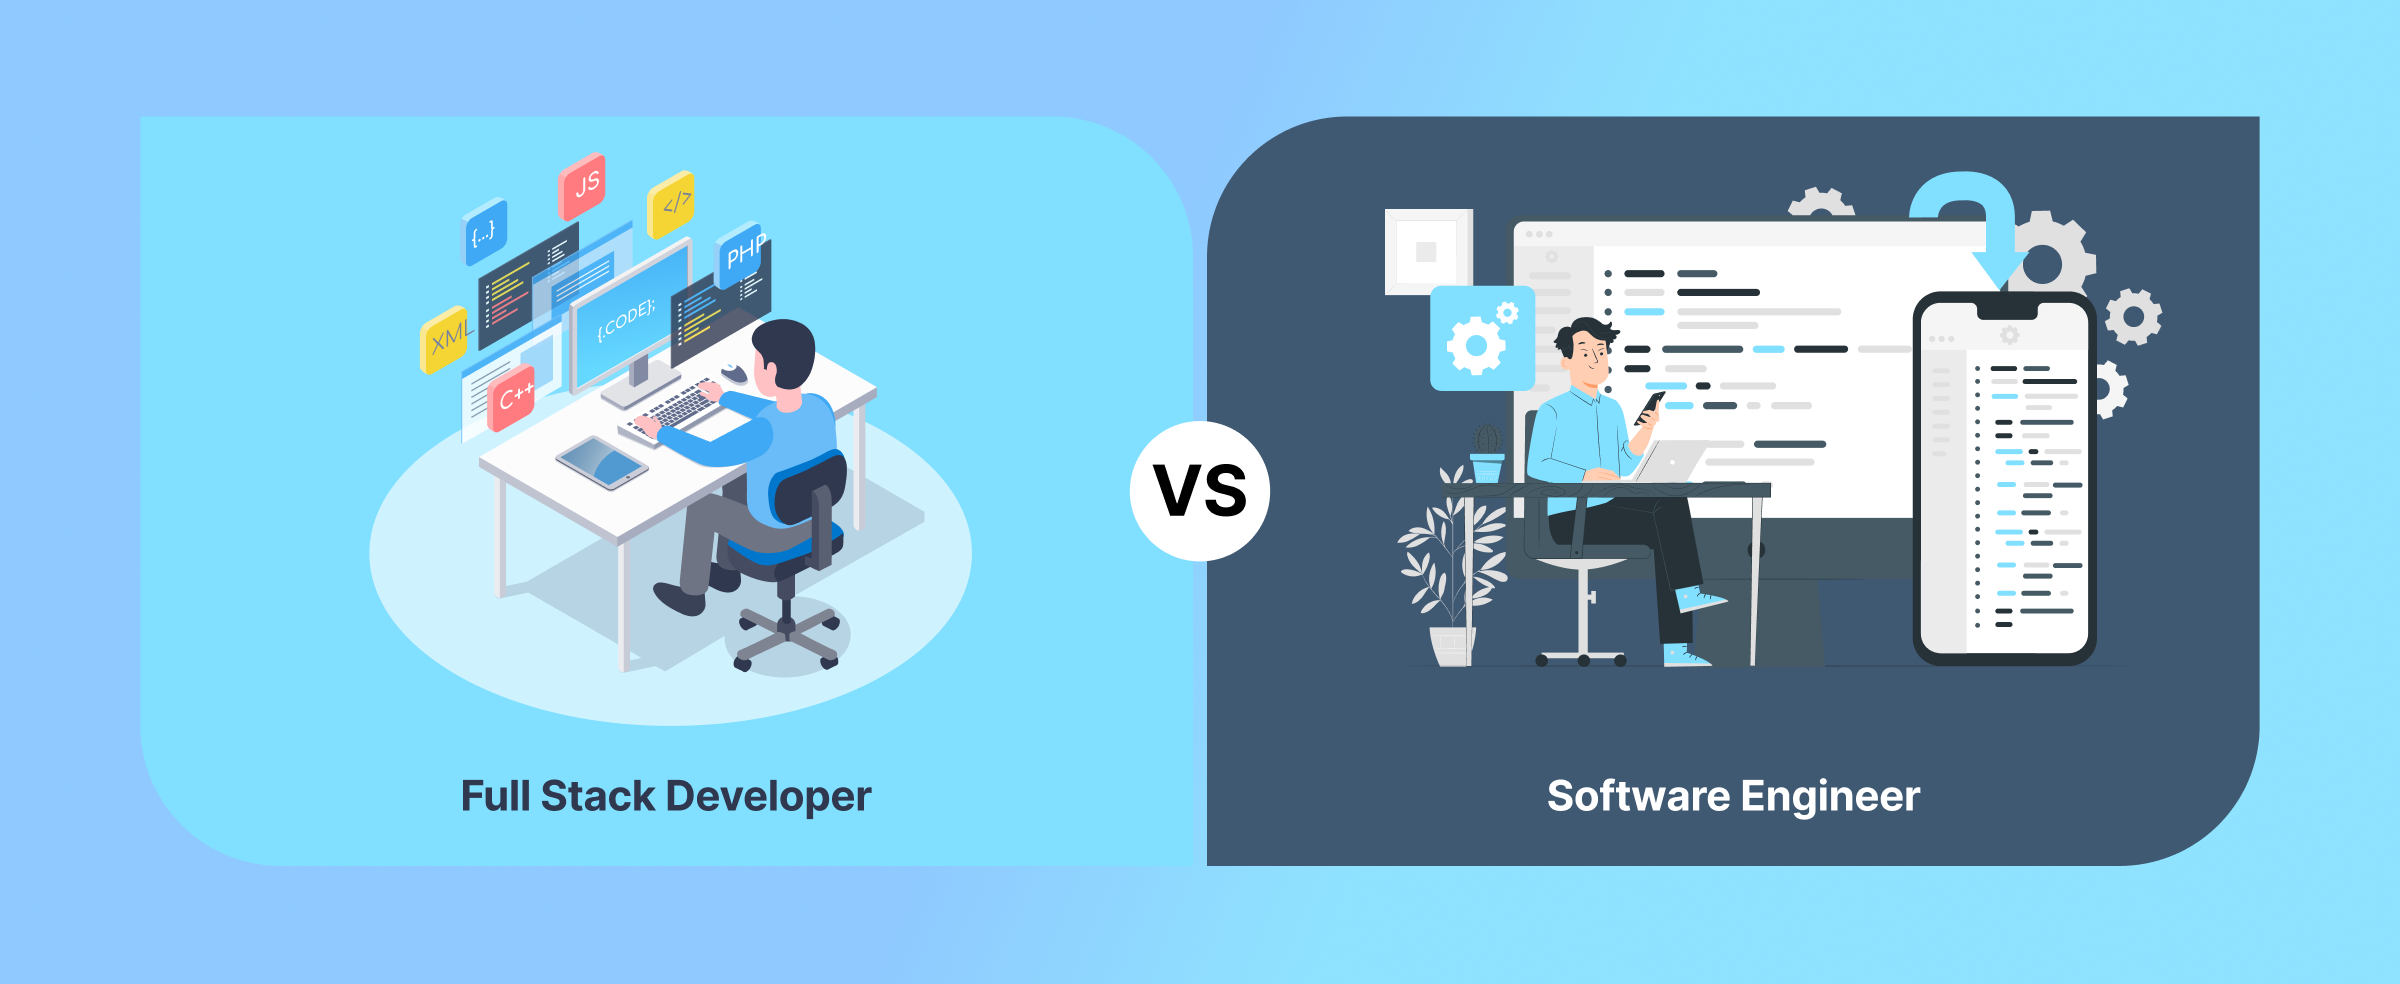 Difference between a Full Stack Developer and a Software Engineer